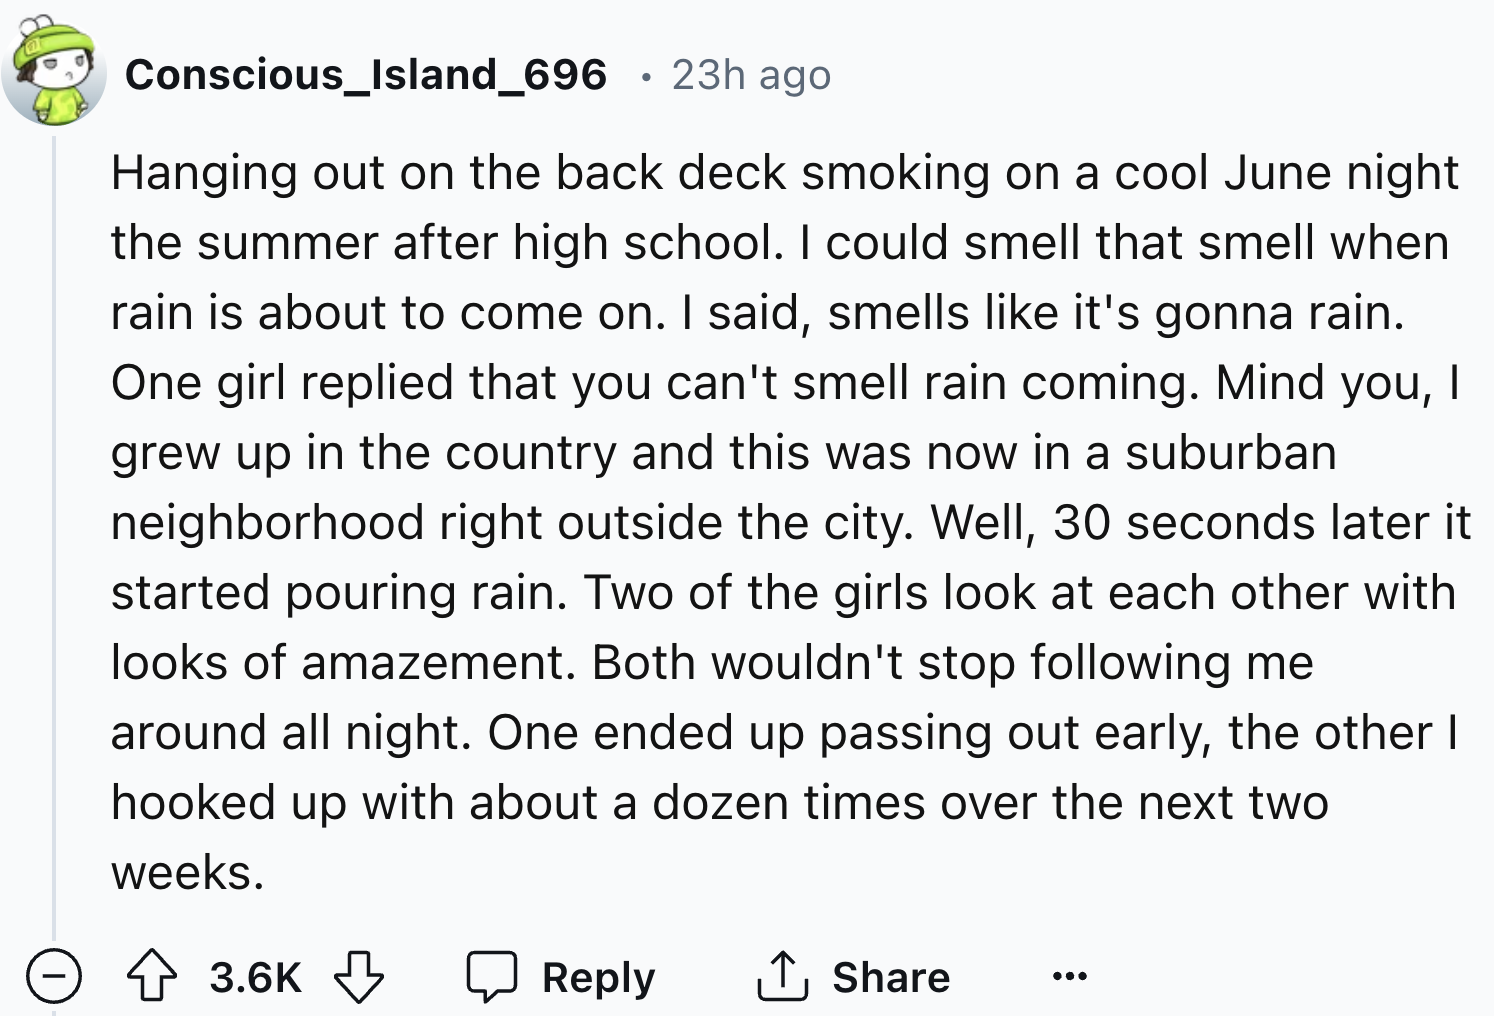 number - Conscious_Island_696 23h ago Hanging out on the back deck smoking on a cool June night the summer after high school. I could smell that smell when rain is about to come on. I said, smells it's gonna rain. One girl replied that you can't smell rai